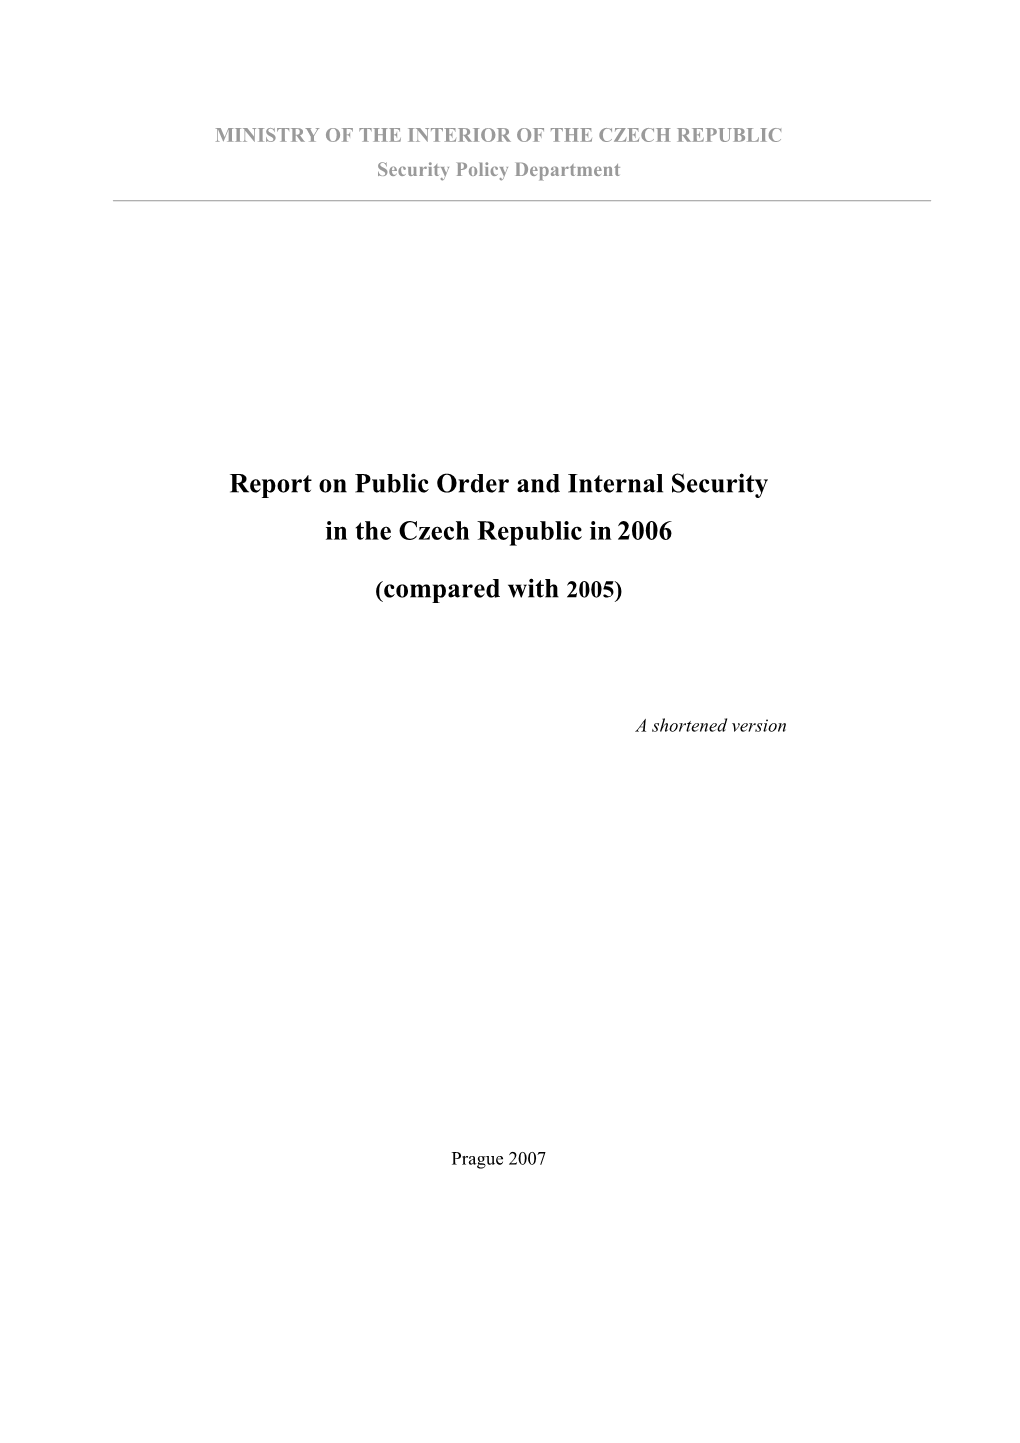 Report on Public Order and Internal Security in the Czech Republic In2006